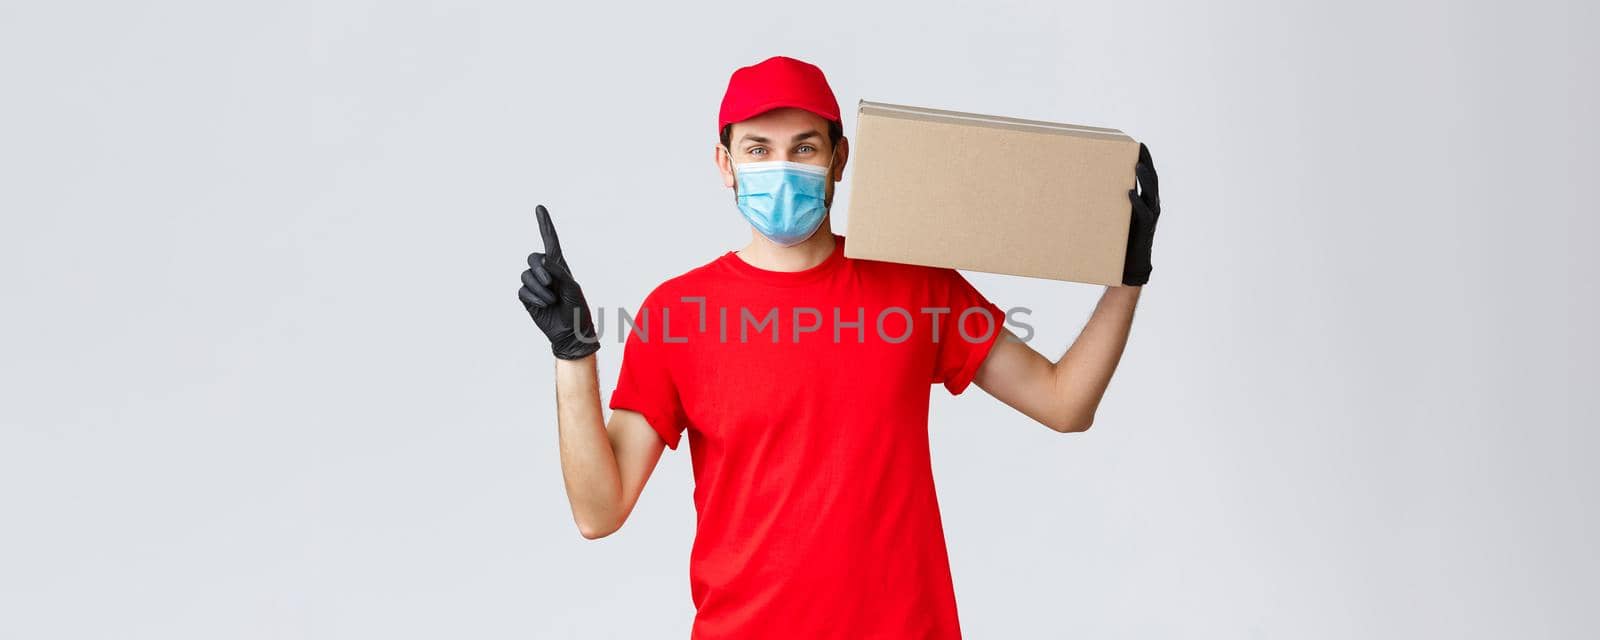 Packages and parcels delivery, covid-19 quarantine delivery, transfer orders. Cheerful courier in face mask, gloves and uniform, carry your parcel to doorsteps, pointing up, hold box with order.